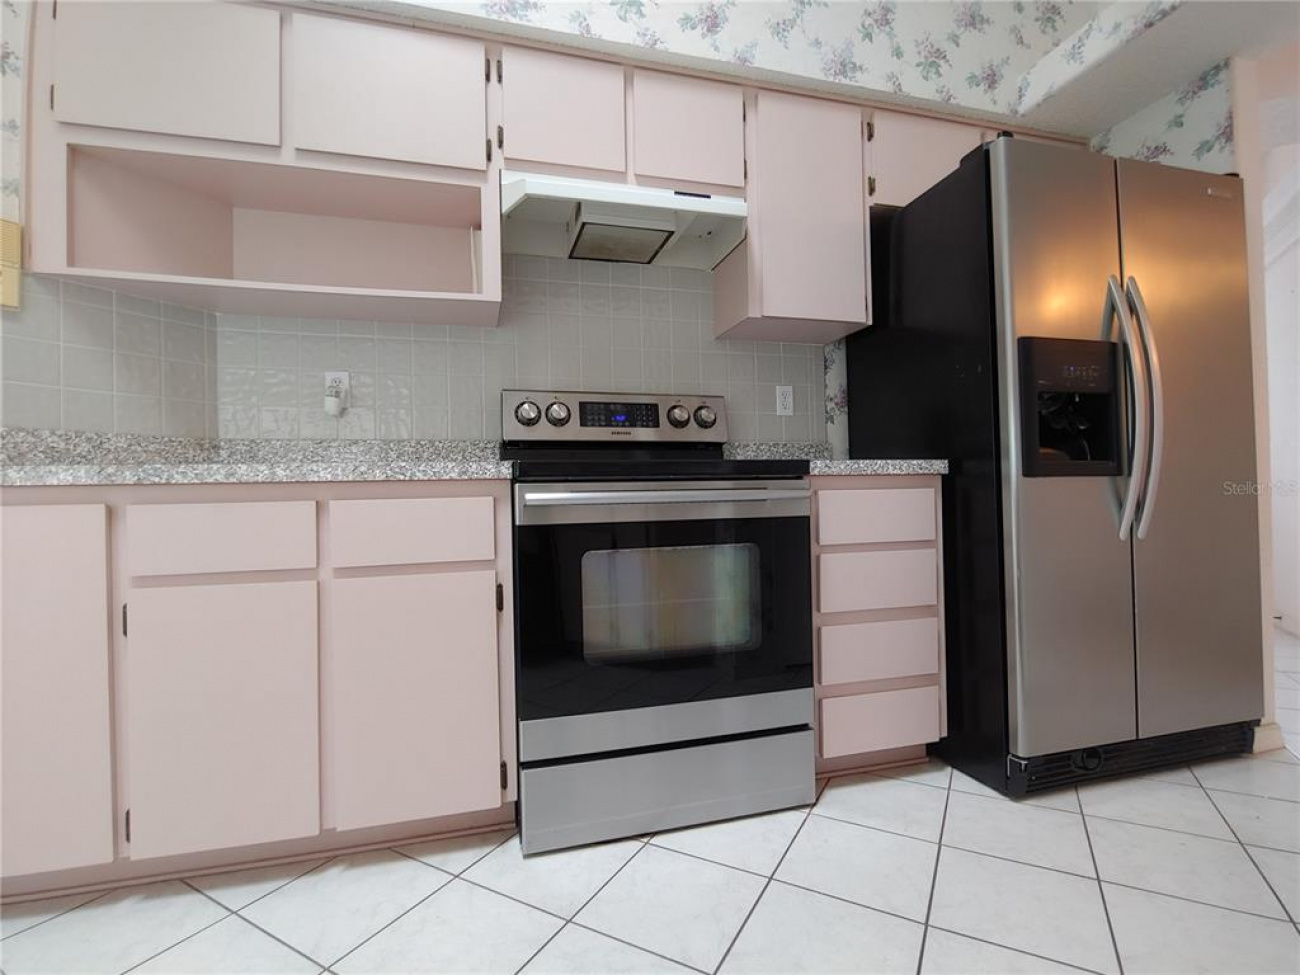 Kitchen Counters and Appliances